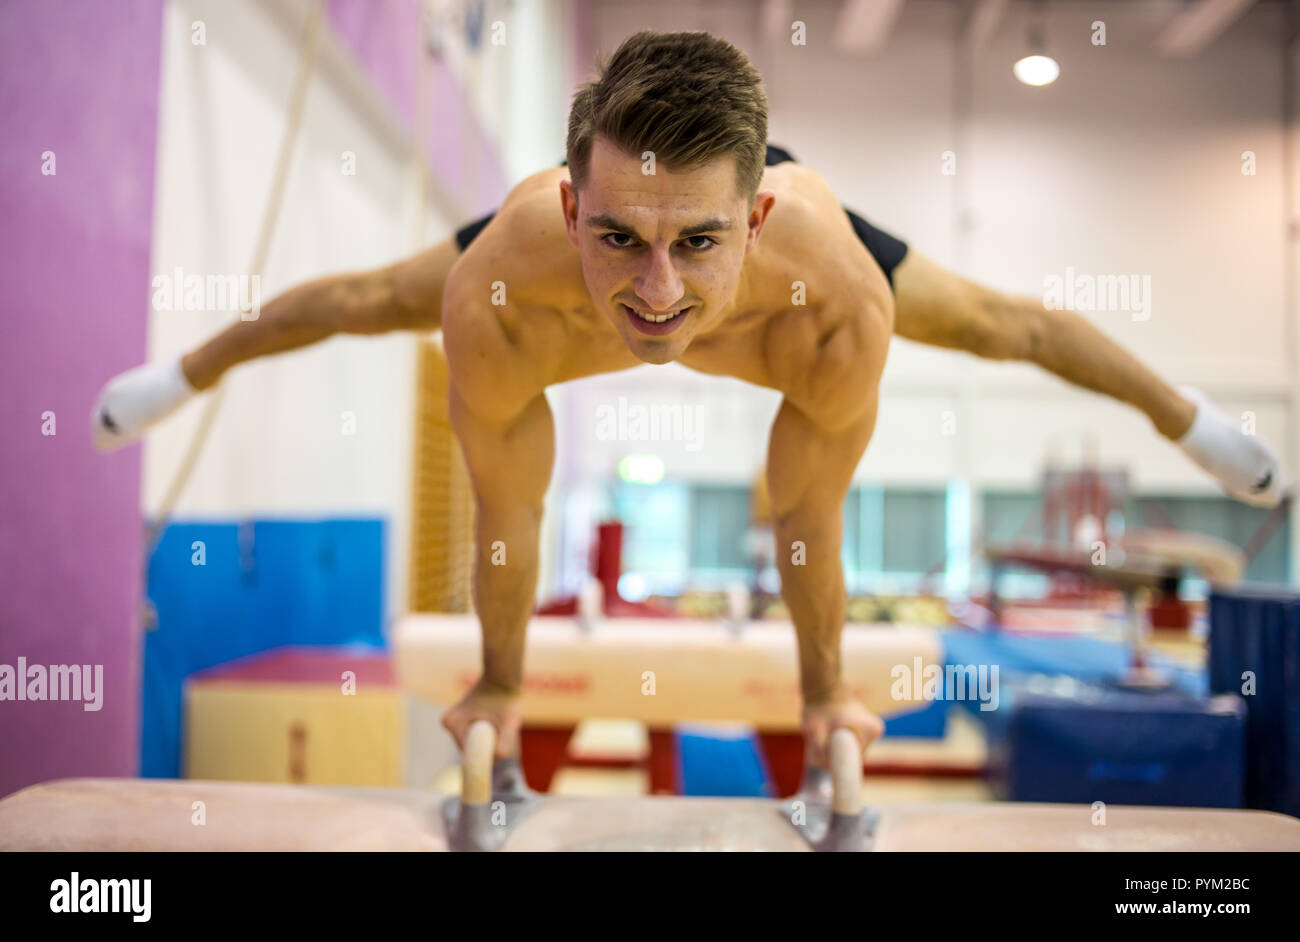 British Olympic Gold gymnast Max Whitlock at Basildon Sporting Centre for a piece to run ahead of the Commonwealth Games when he'll be one of the star Stock Photo